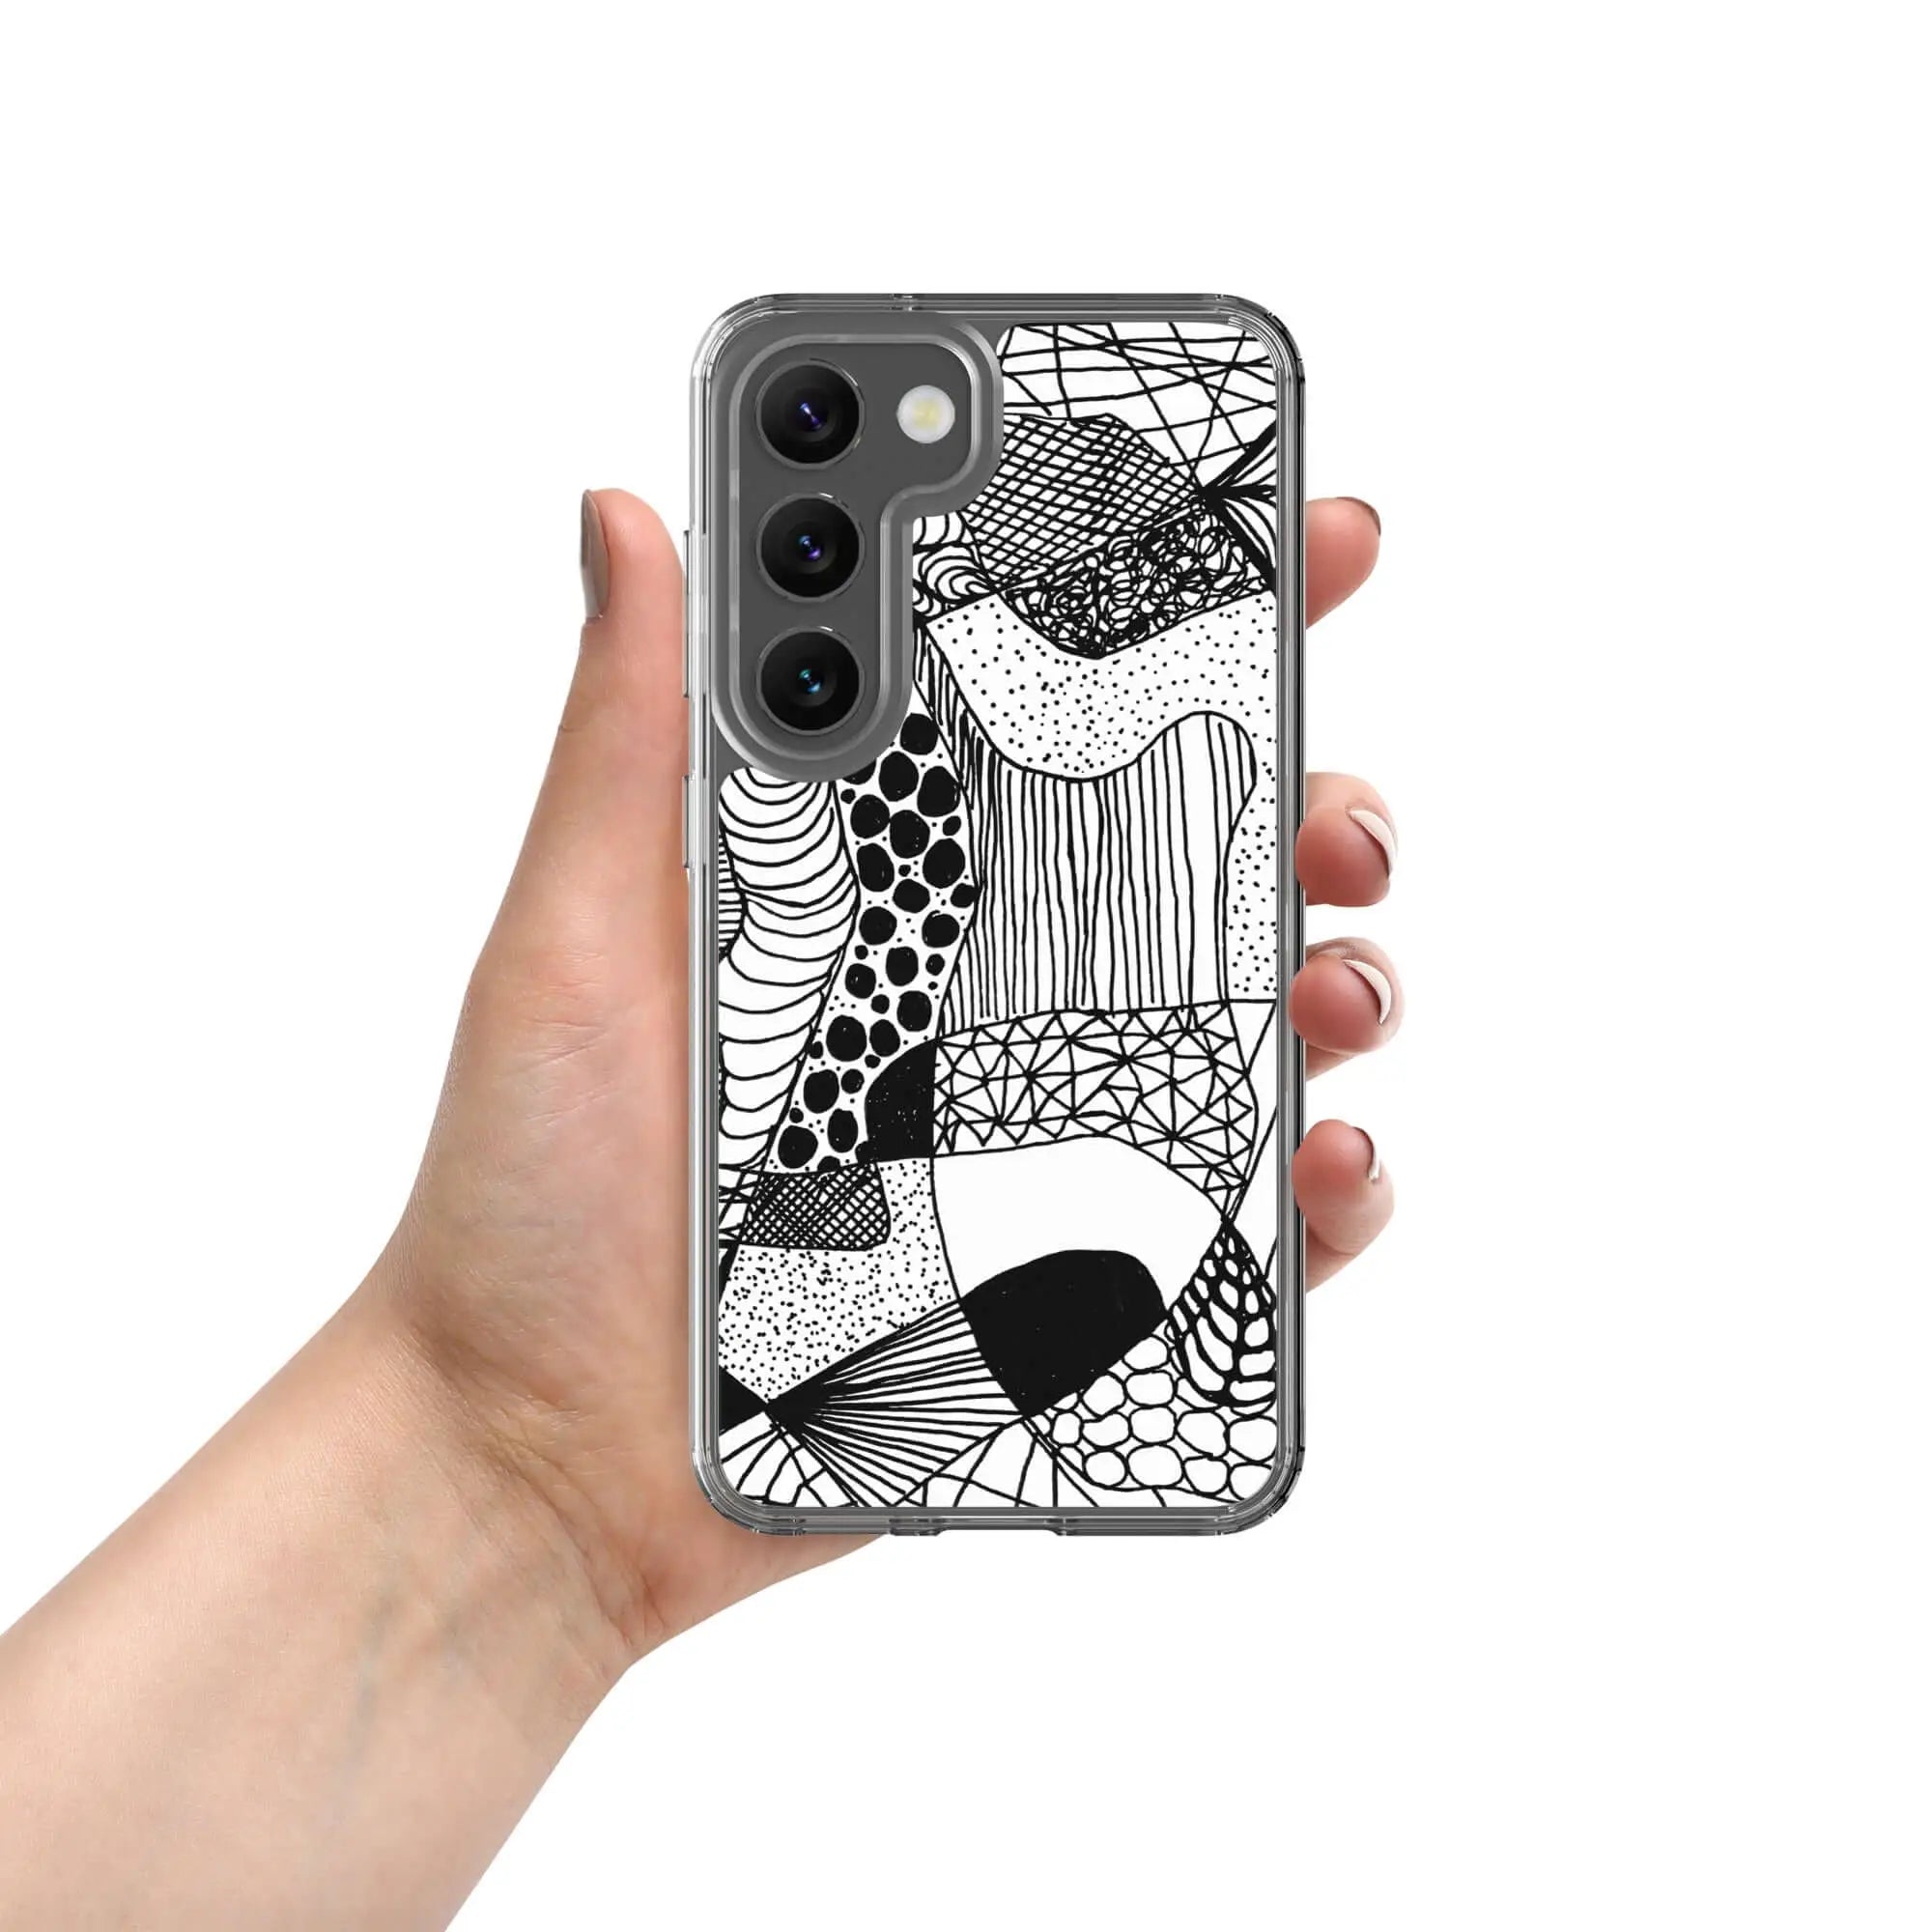 Black and white graphic Samsung case with abstract design held by hand